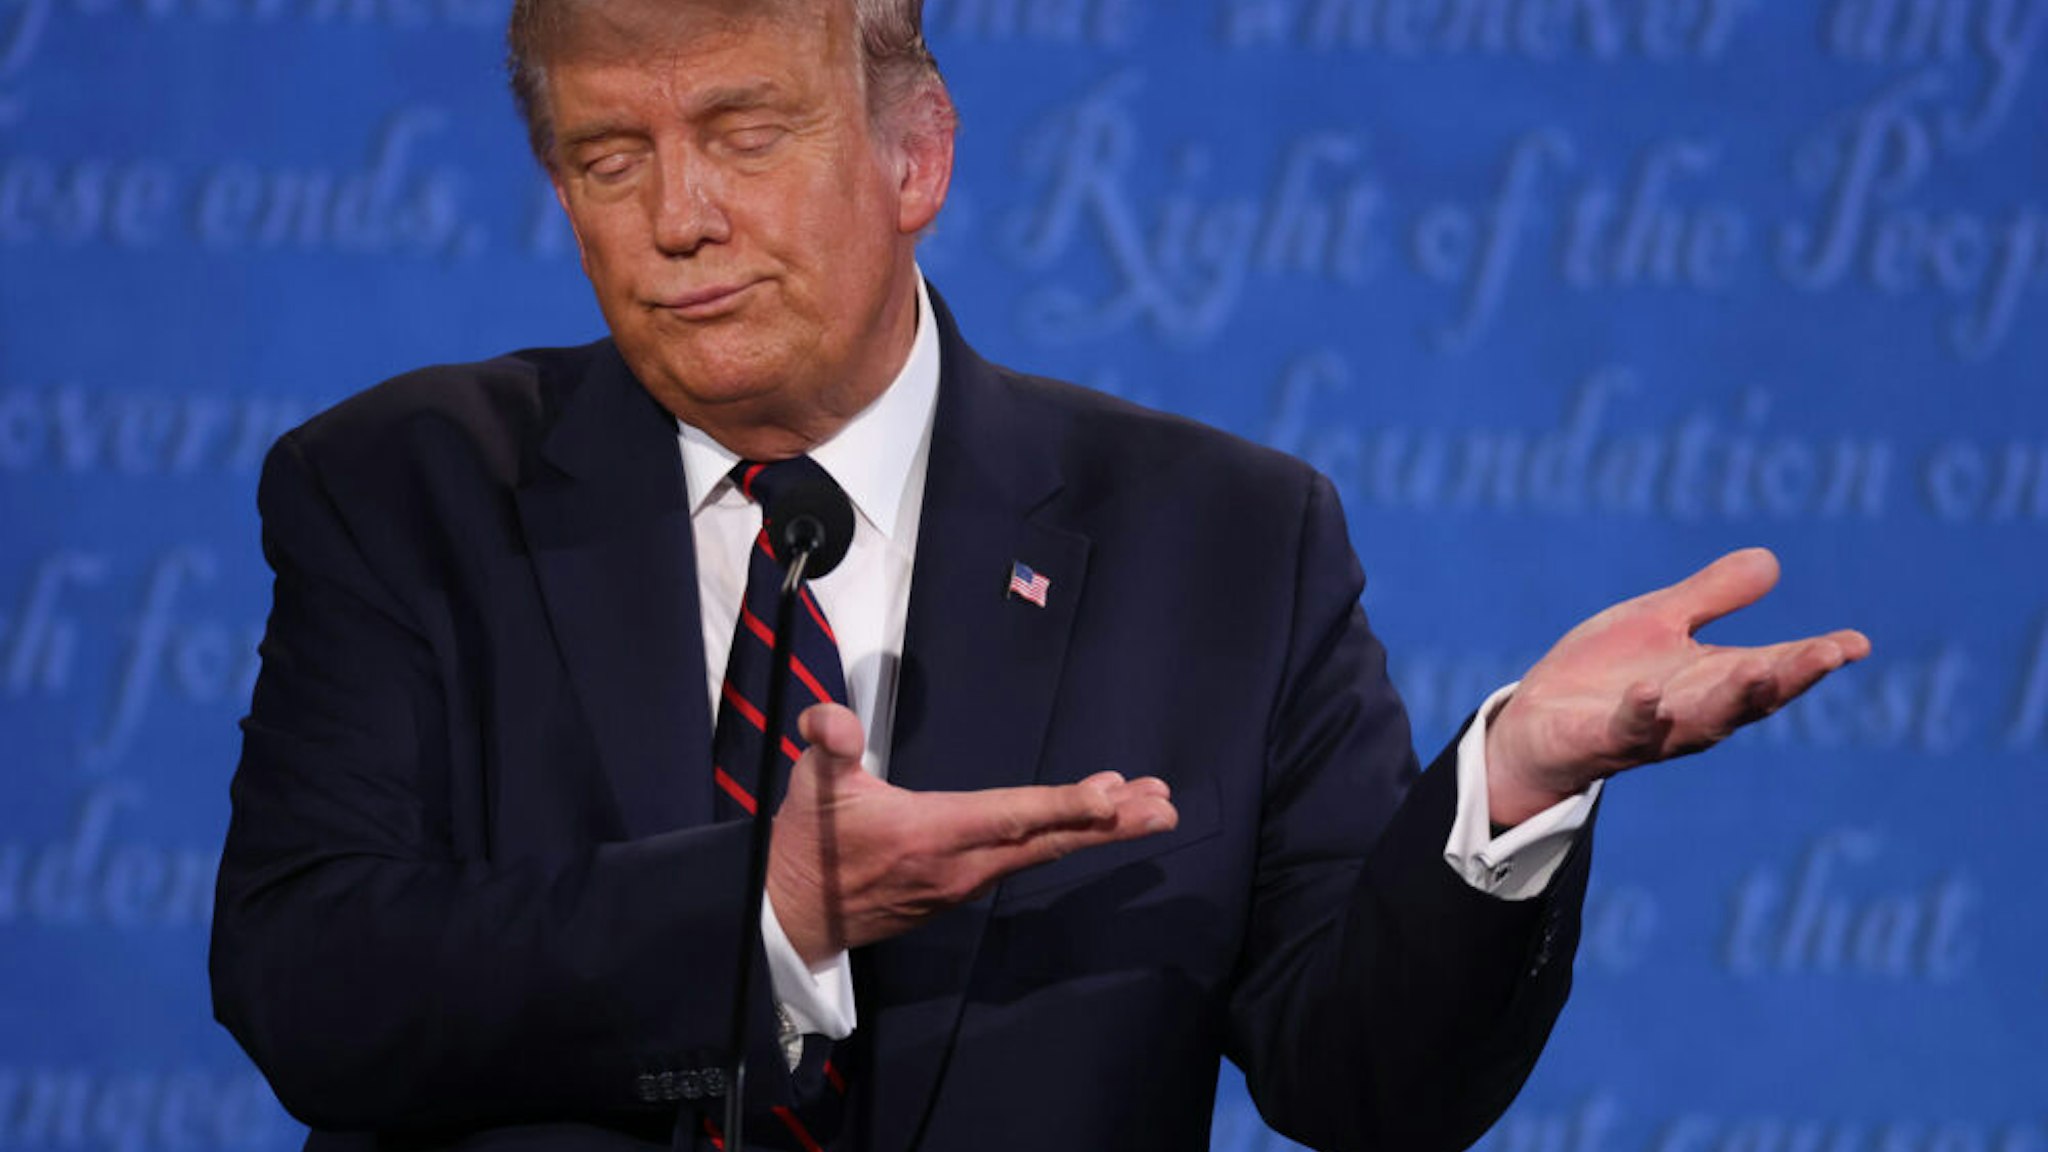 CLEVELAND, OHIO - SEPTEMBER 29: U.S. President Donald Trump participates in the first presidential debate against Democratic presidential nominee Joe Biden at the Health Education Campus of Case Western Reserve University on September 29, 2020 in Cleveland, Ohio. This is the first of three planned debates between the two candidates in the lead up to the election on November 3.